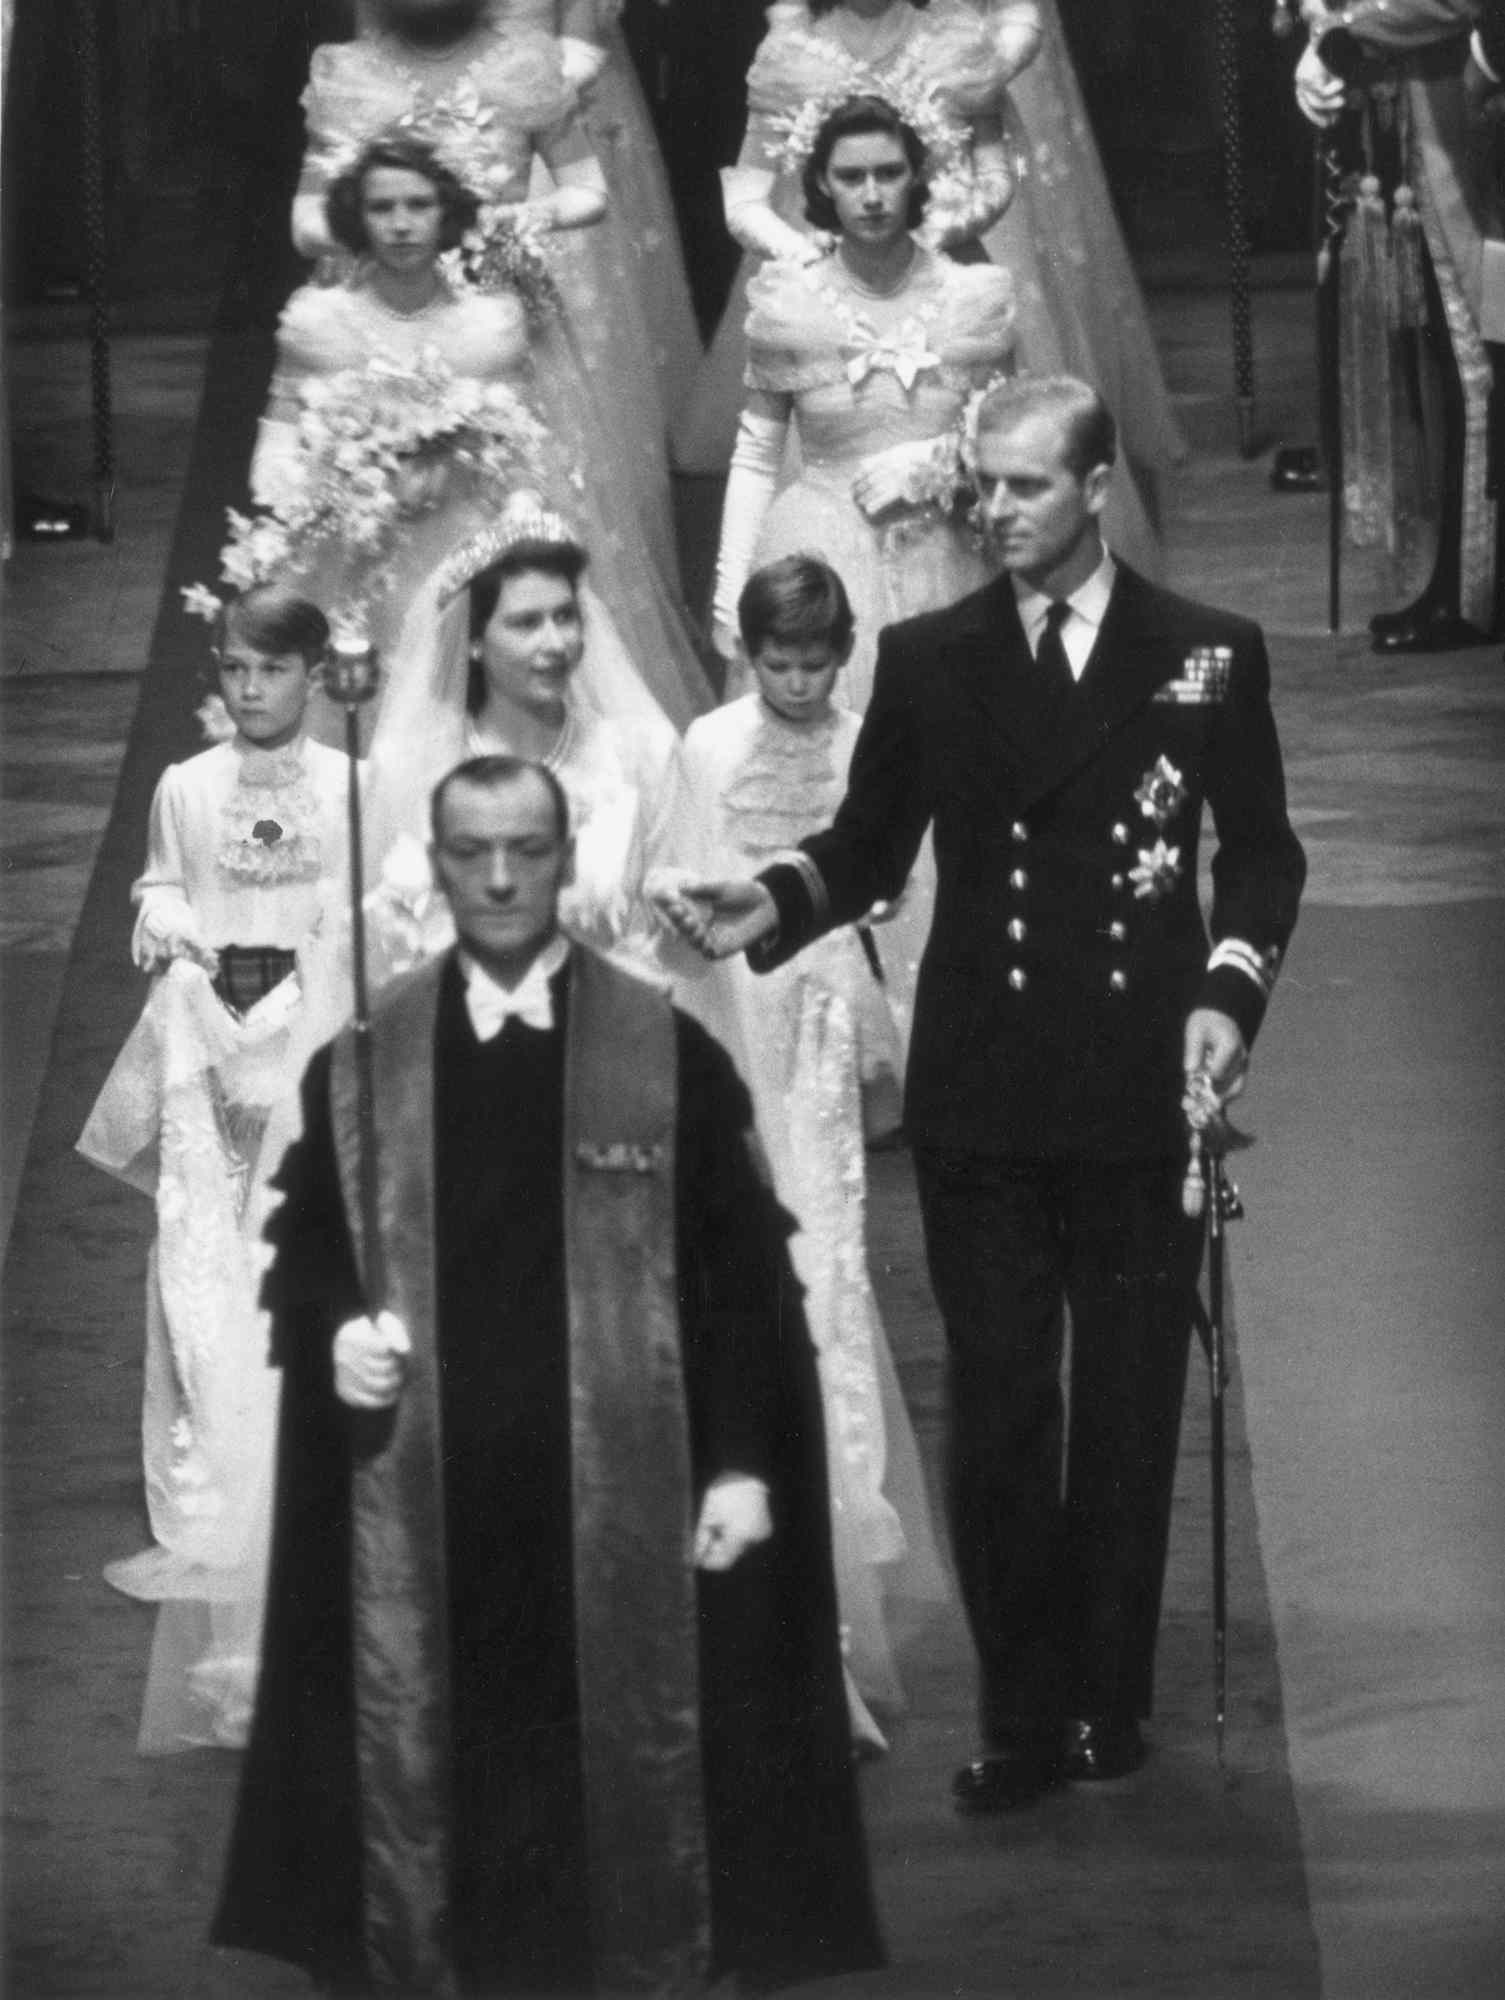 Princess Elizabeth and Prince Philip make their way down the aisle of Westminster Abbey, London, on their wedding day